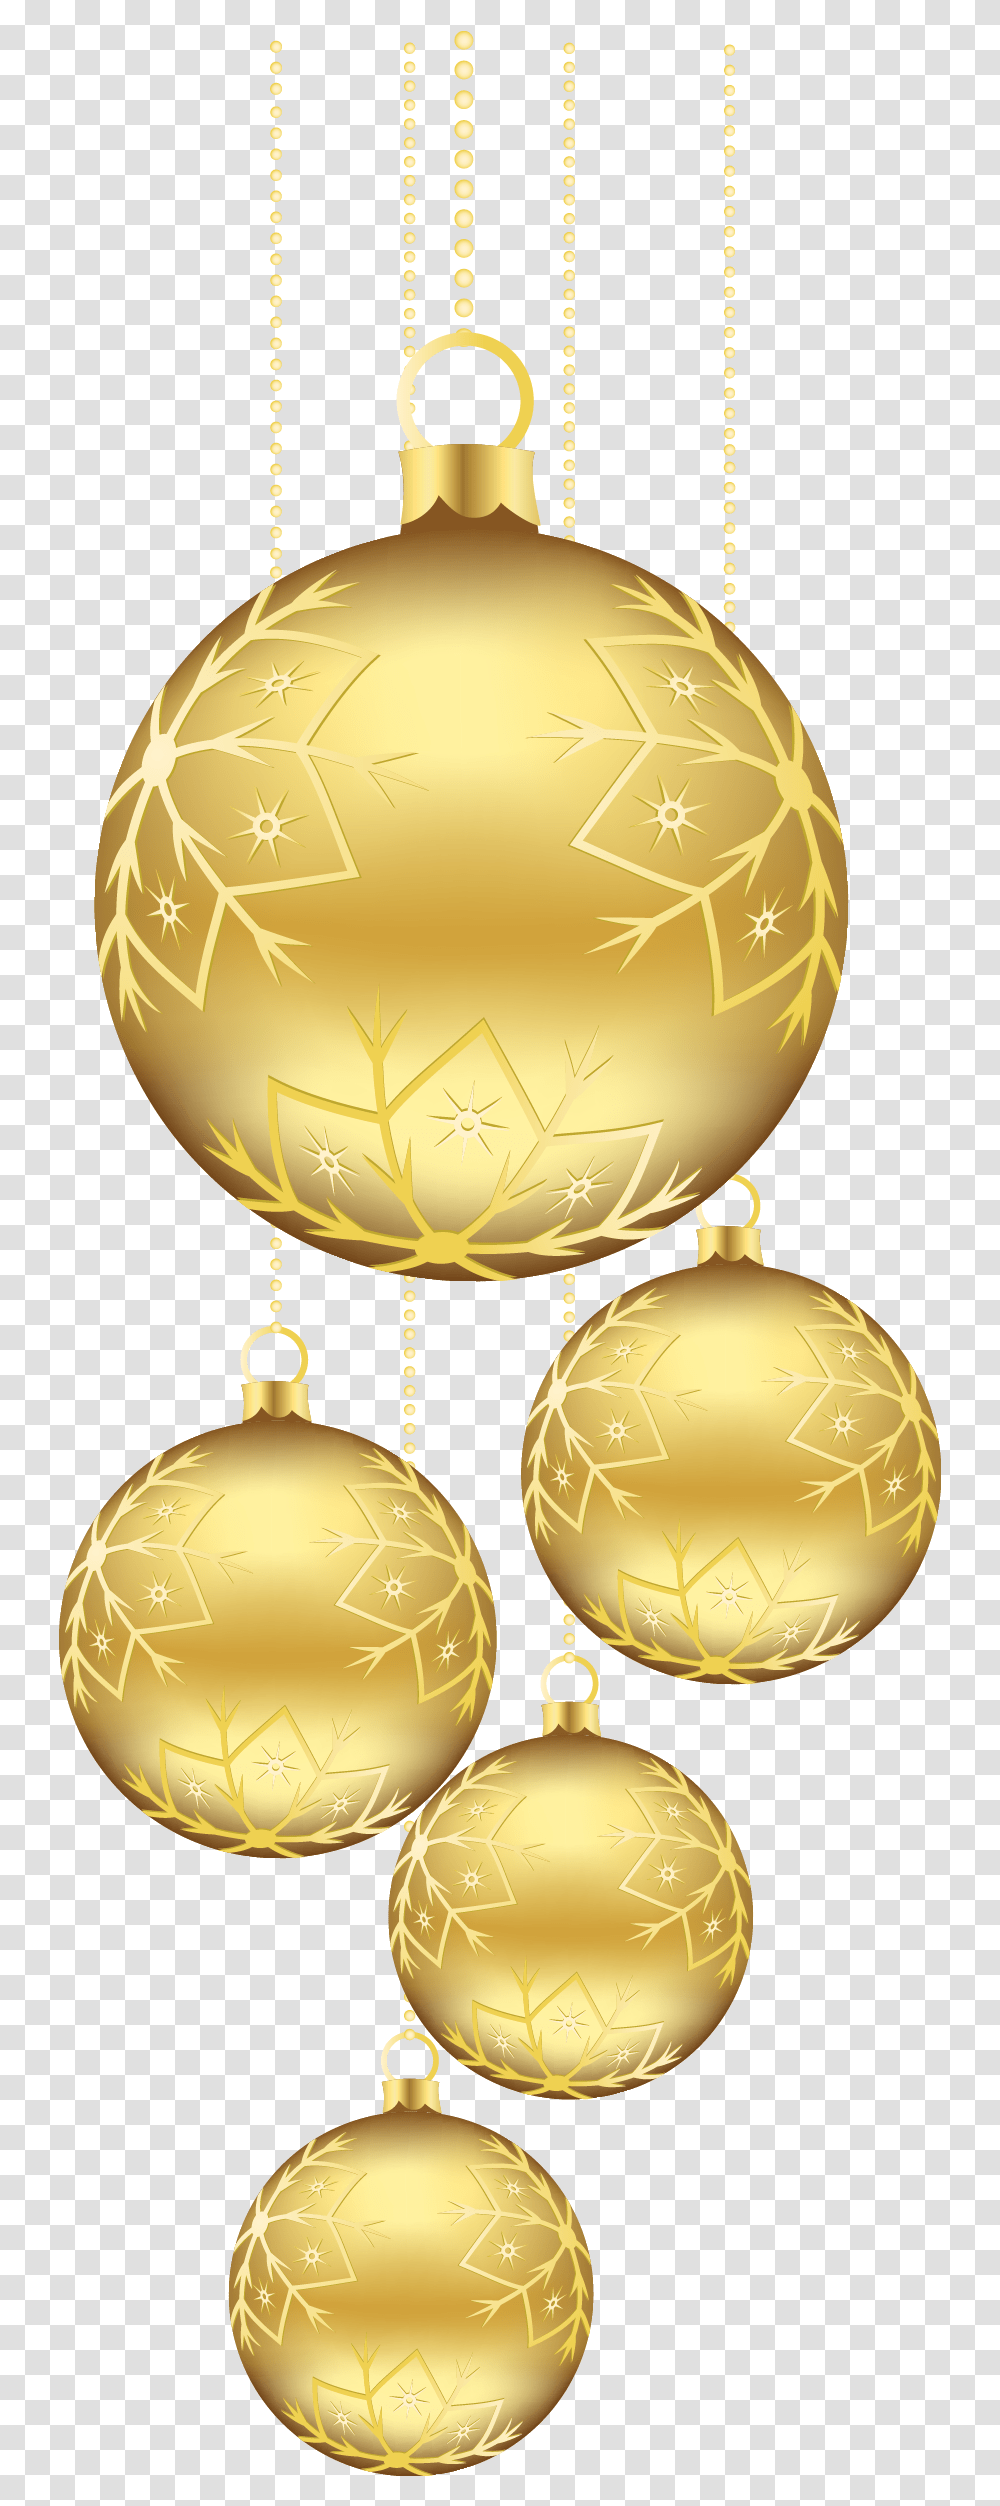 Christmas Balls Ornaments & Clipart Free Christmas Decorations Gold, Lighting, Lamp, Gold Medal, Trophy Transparent Png